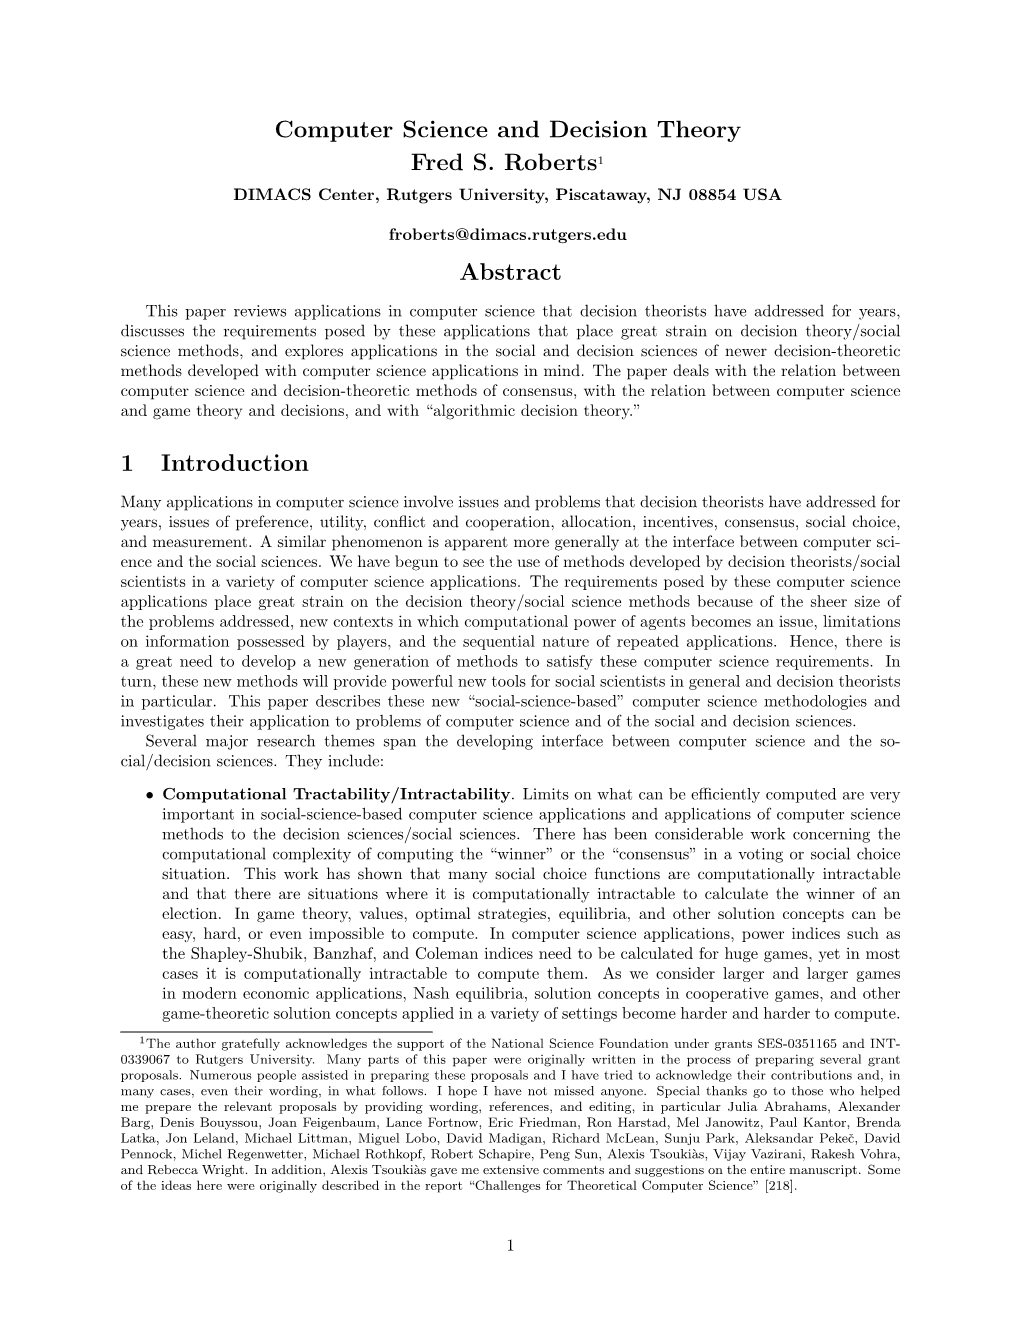 Computer Science and Decision Theory Fred S. Roberts1 Abstract 1